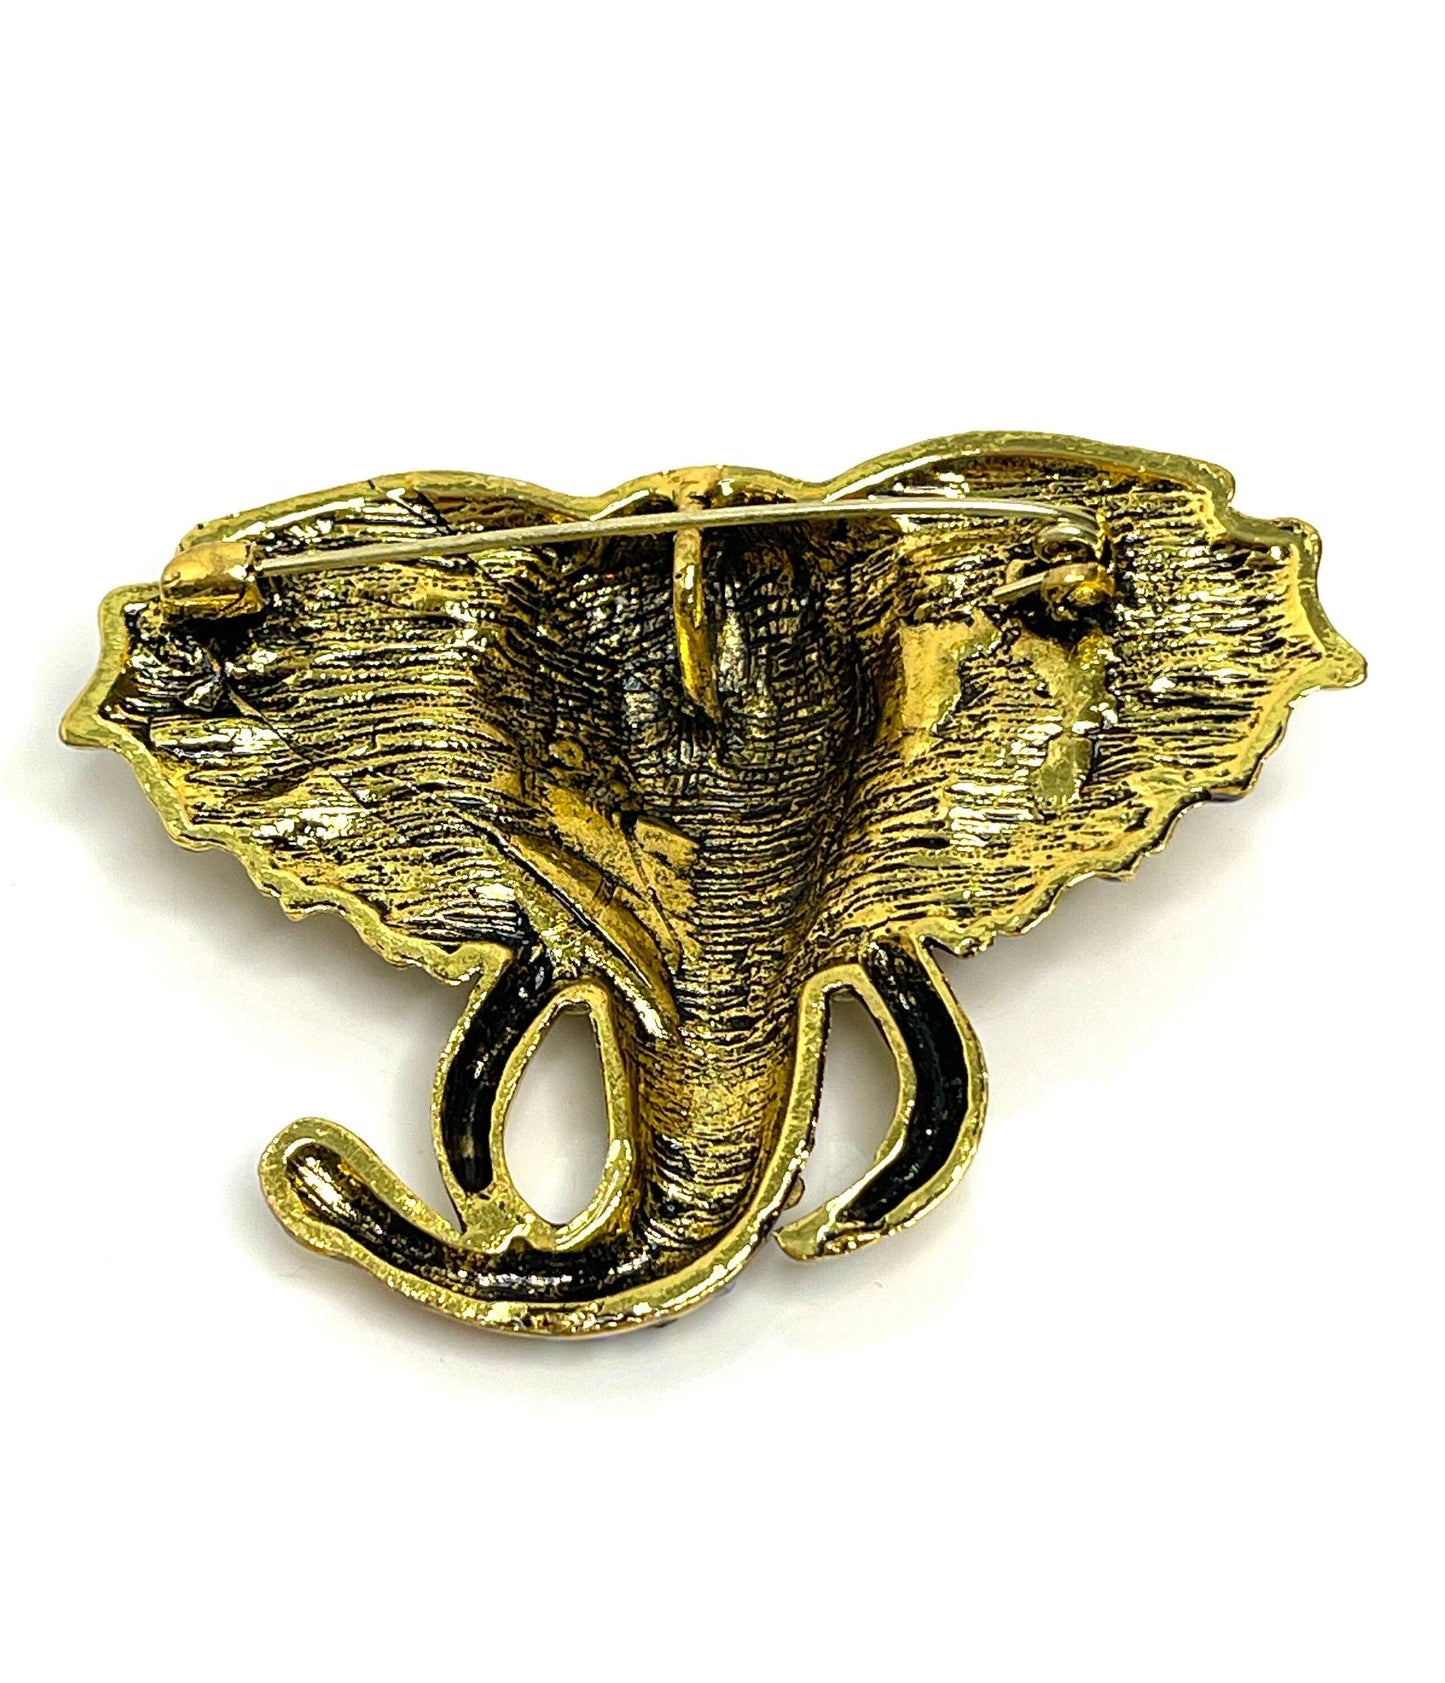 Large Elephant Head Brooch, Sparkly Elephant Pin, Crystal Animal Pin, Multi Crystal Diamonte Pin, Brooches For Women